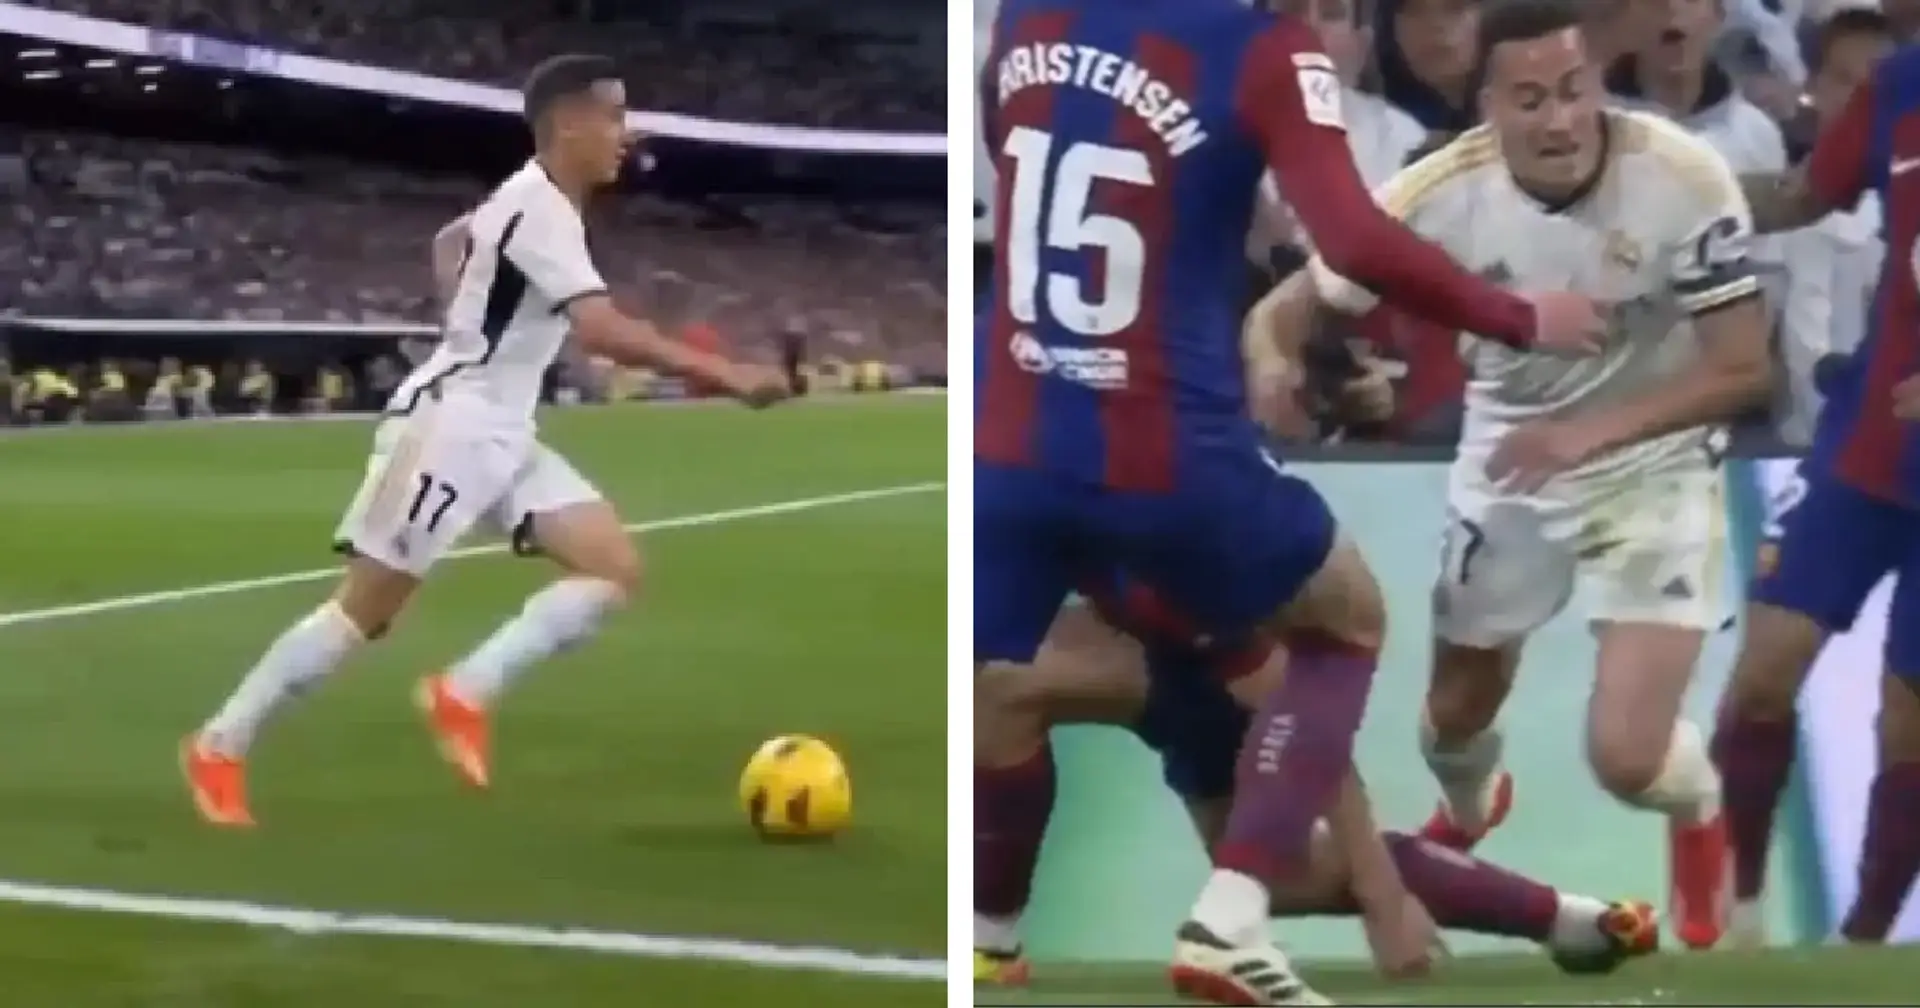 Was Cubarsi's foul on Vazquez really a penalty? Expert clarifies 